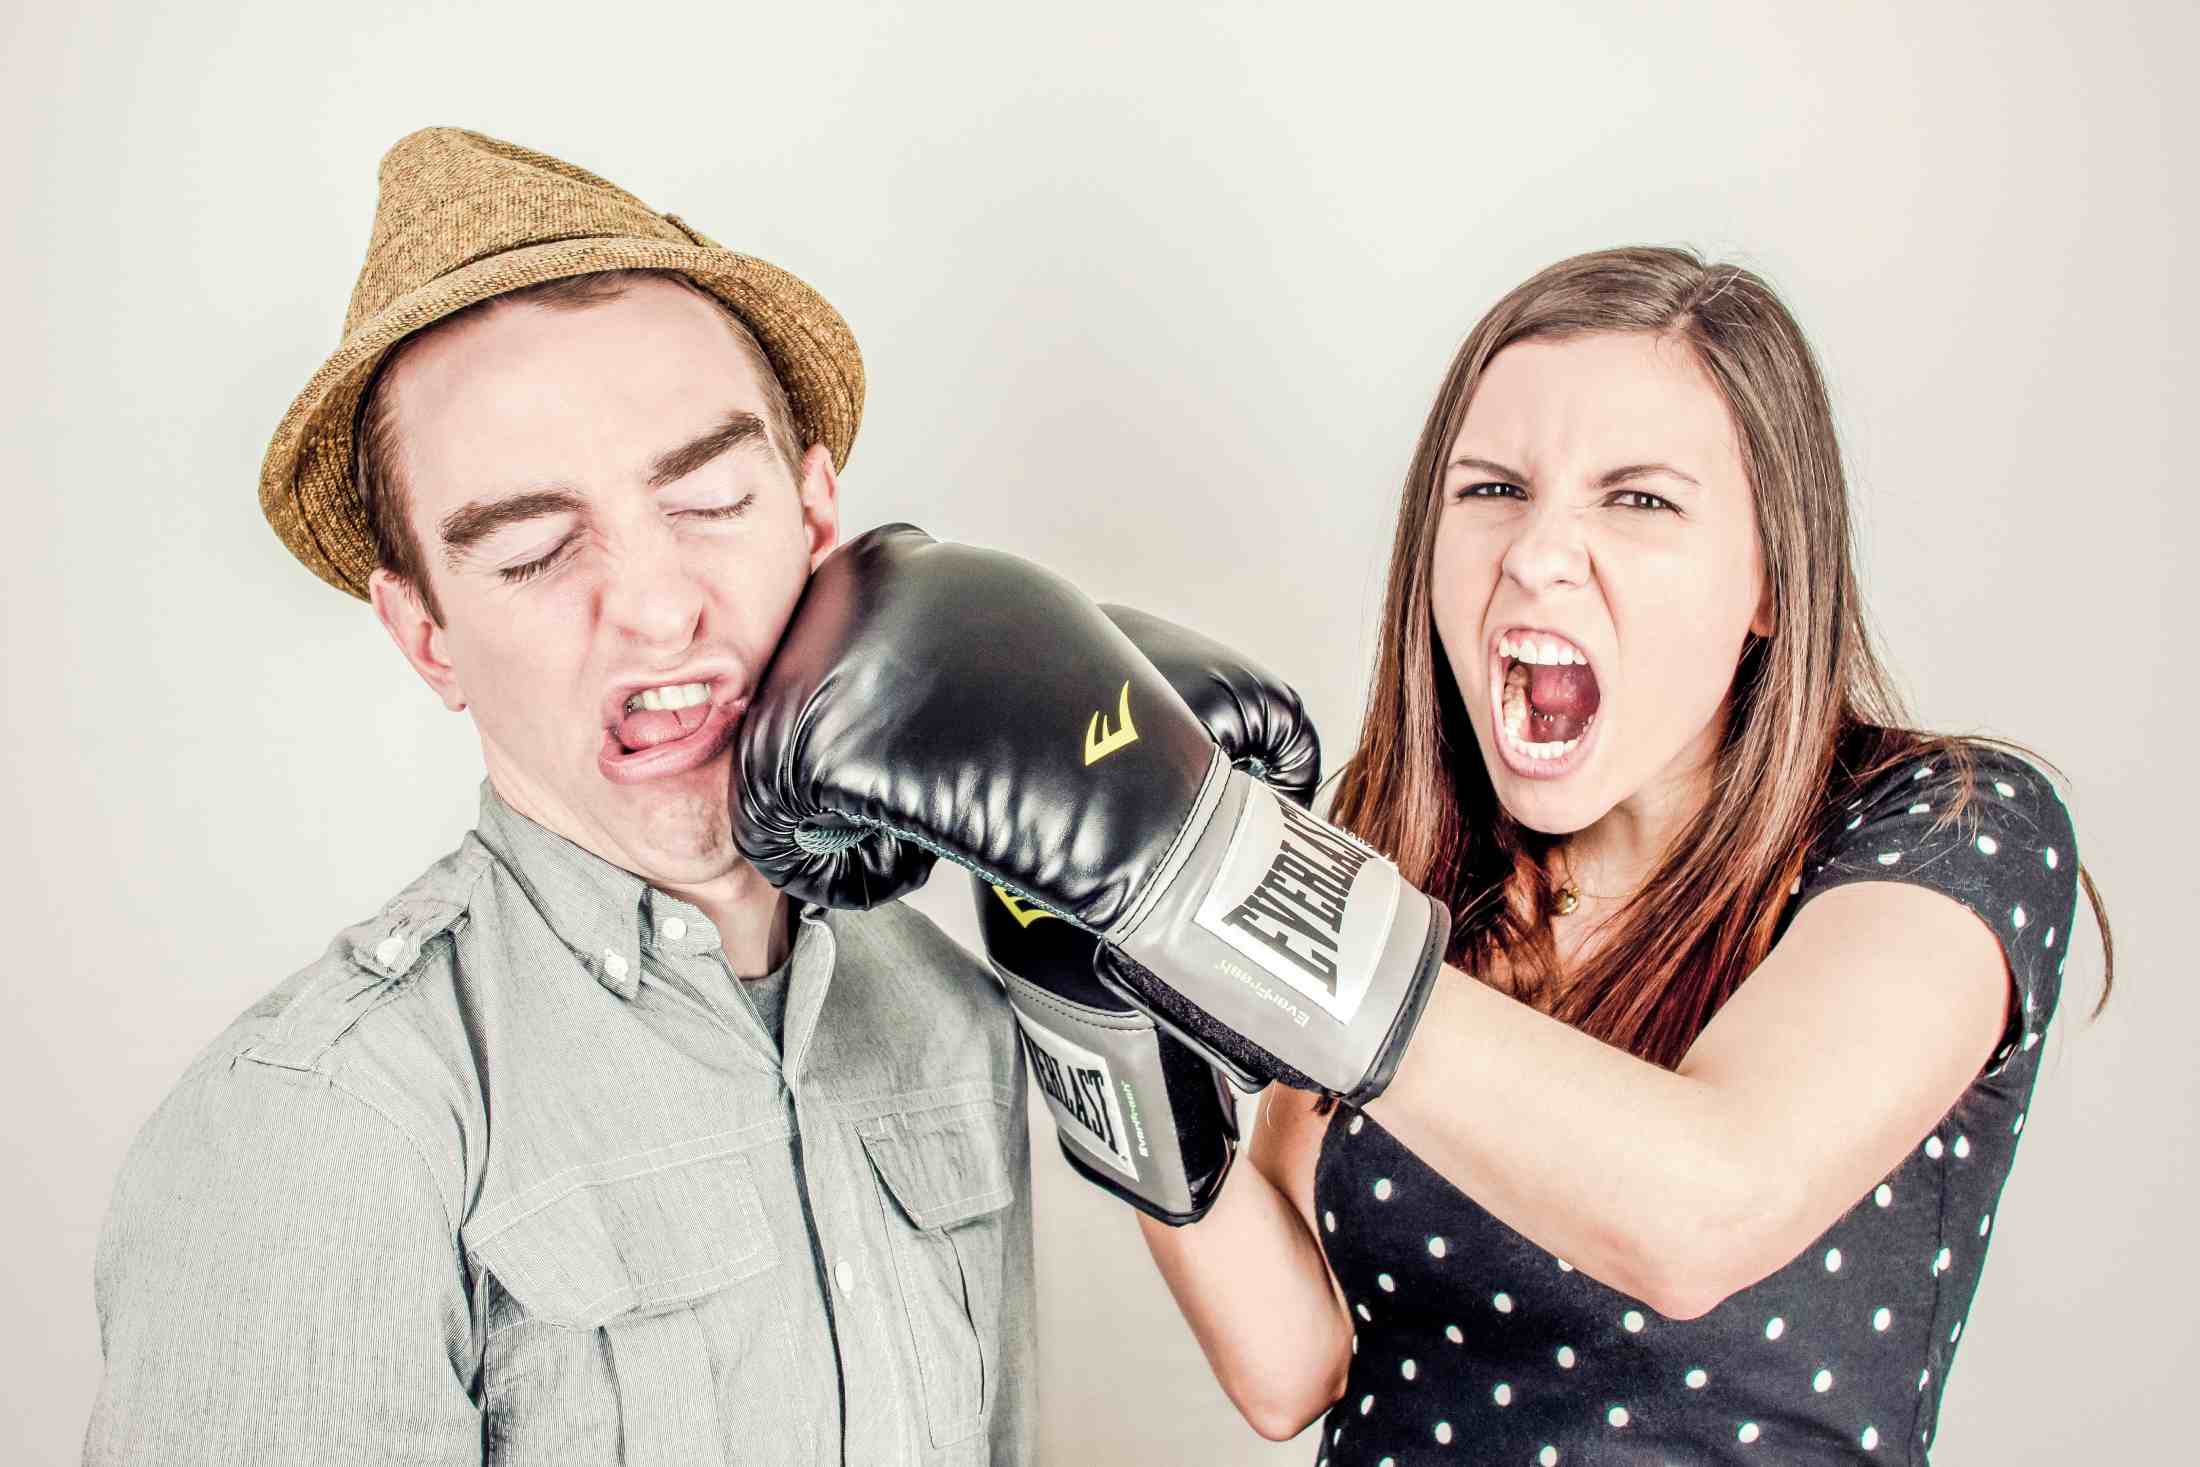 A man is punching a woman with a boxing glove.